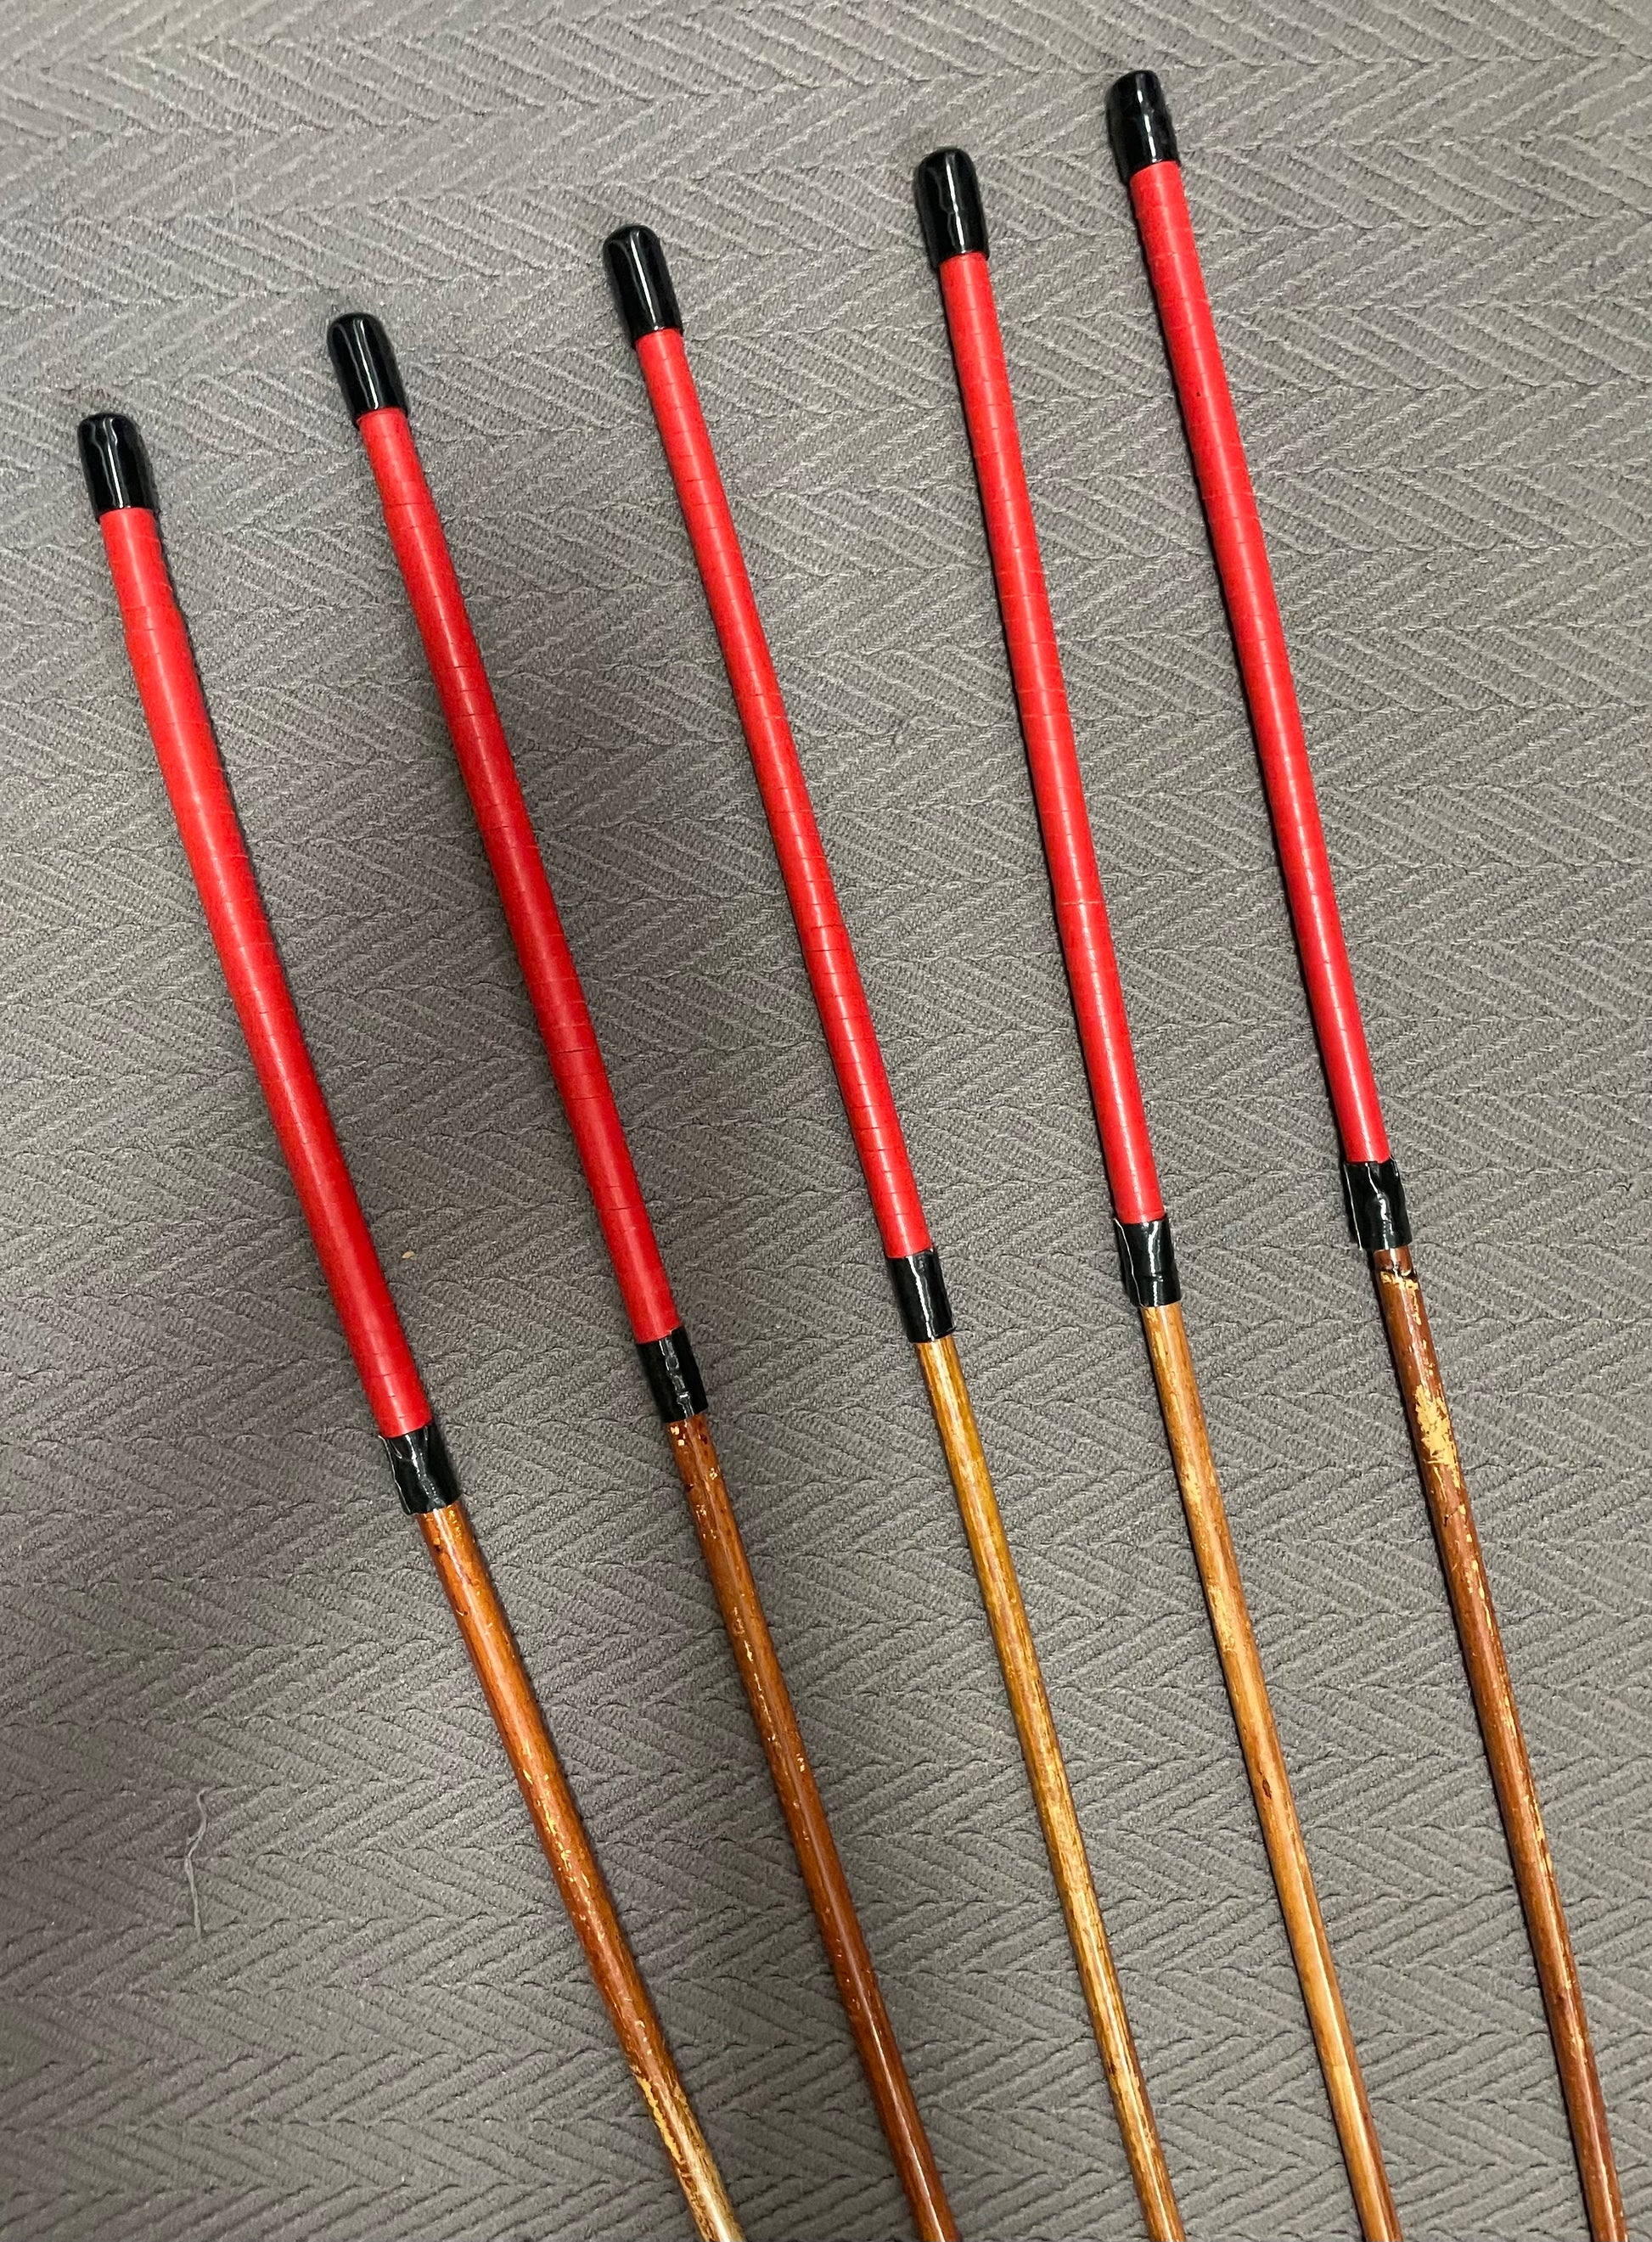 Sales Special Set of 5 Smoked Dragon Rattan Canes / Whipping Canes - 100 cms Length - RED or BLACK Kangaroo Leather Handles-  - Englishvice Canes